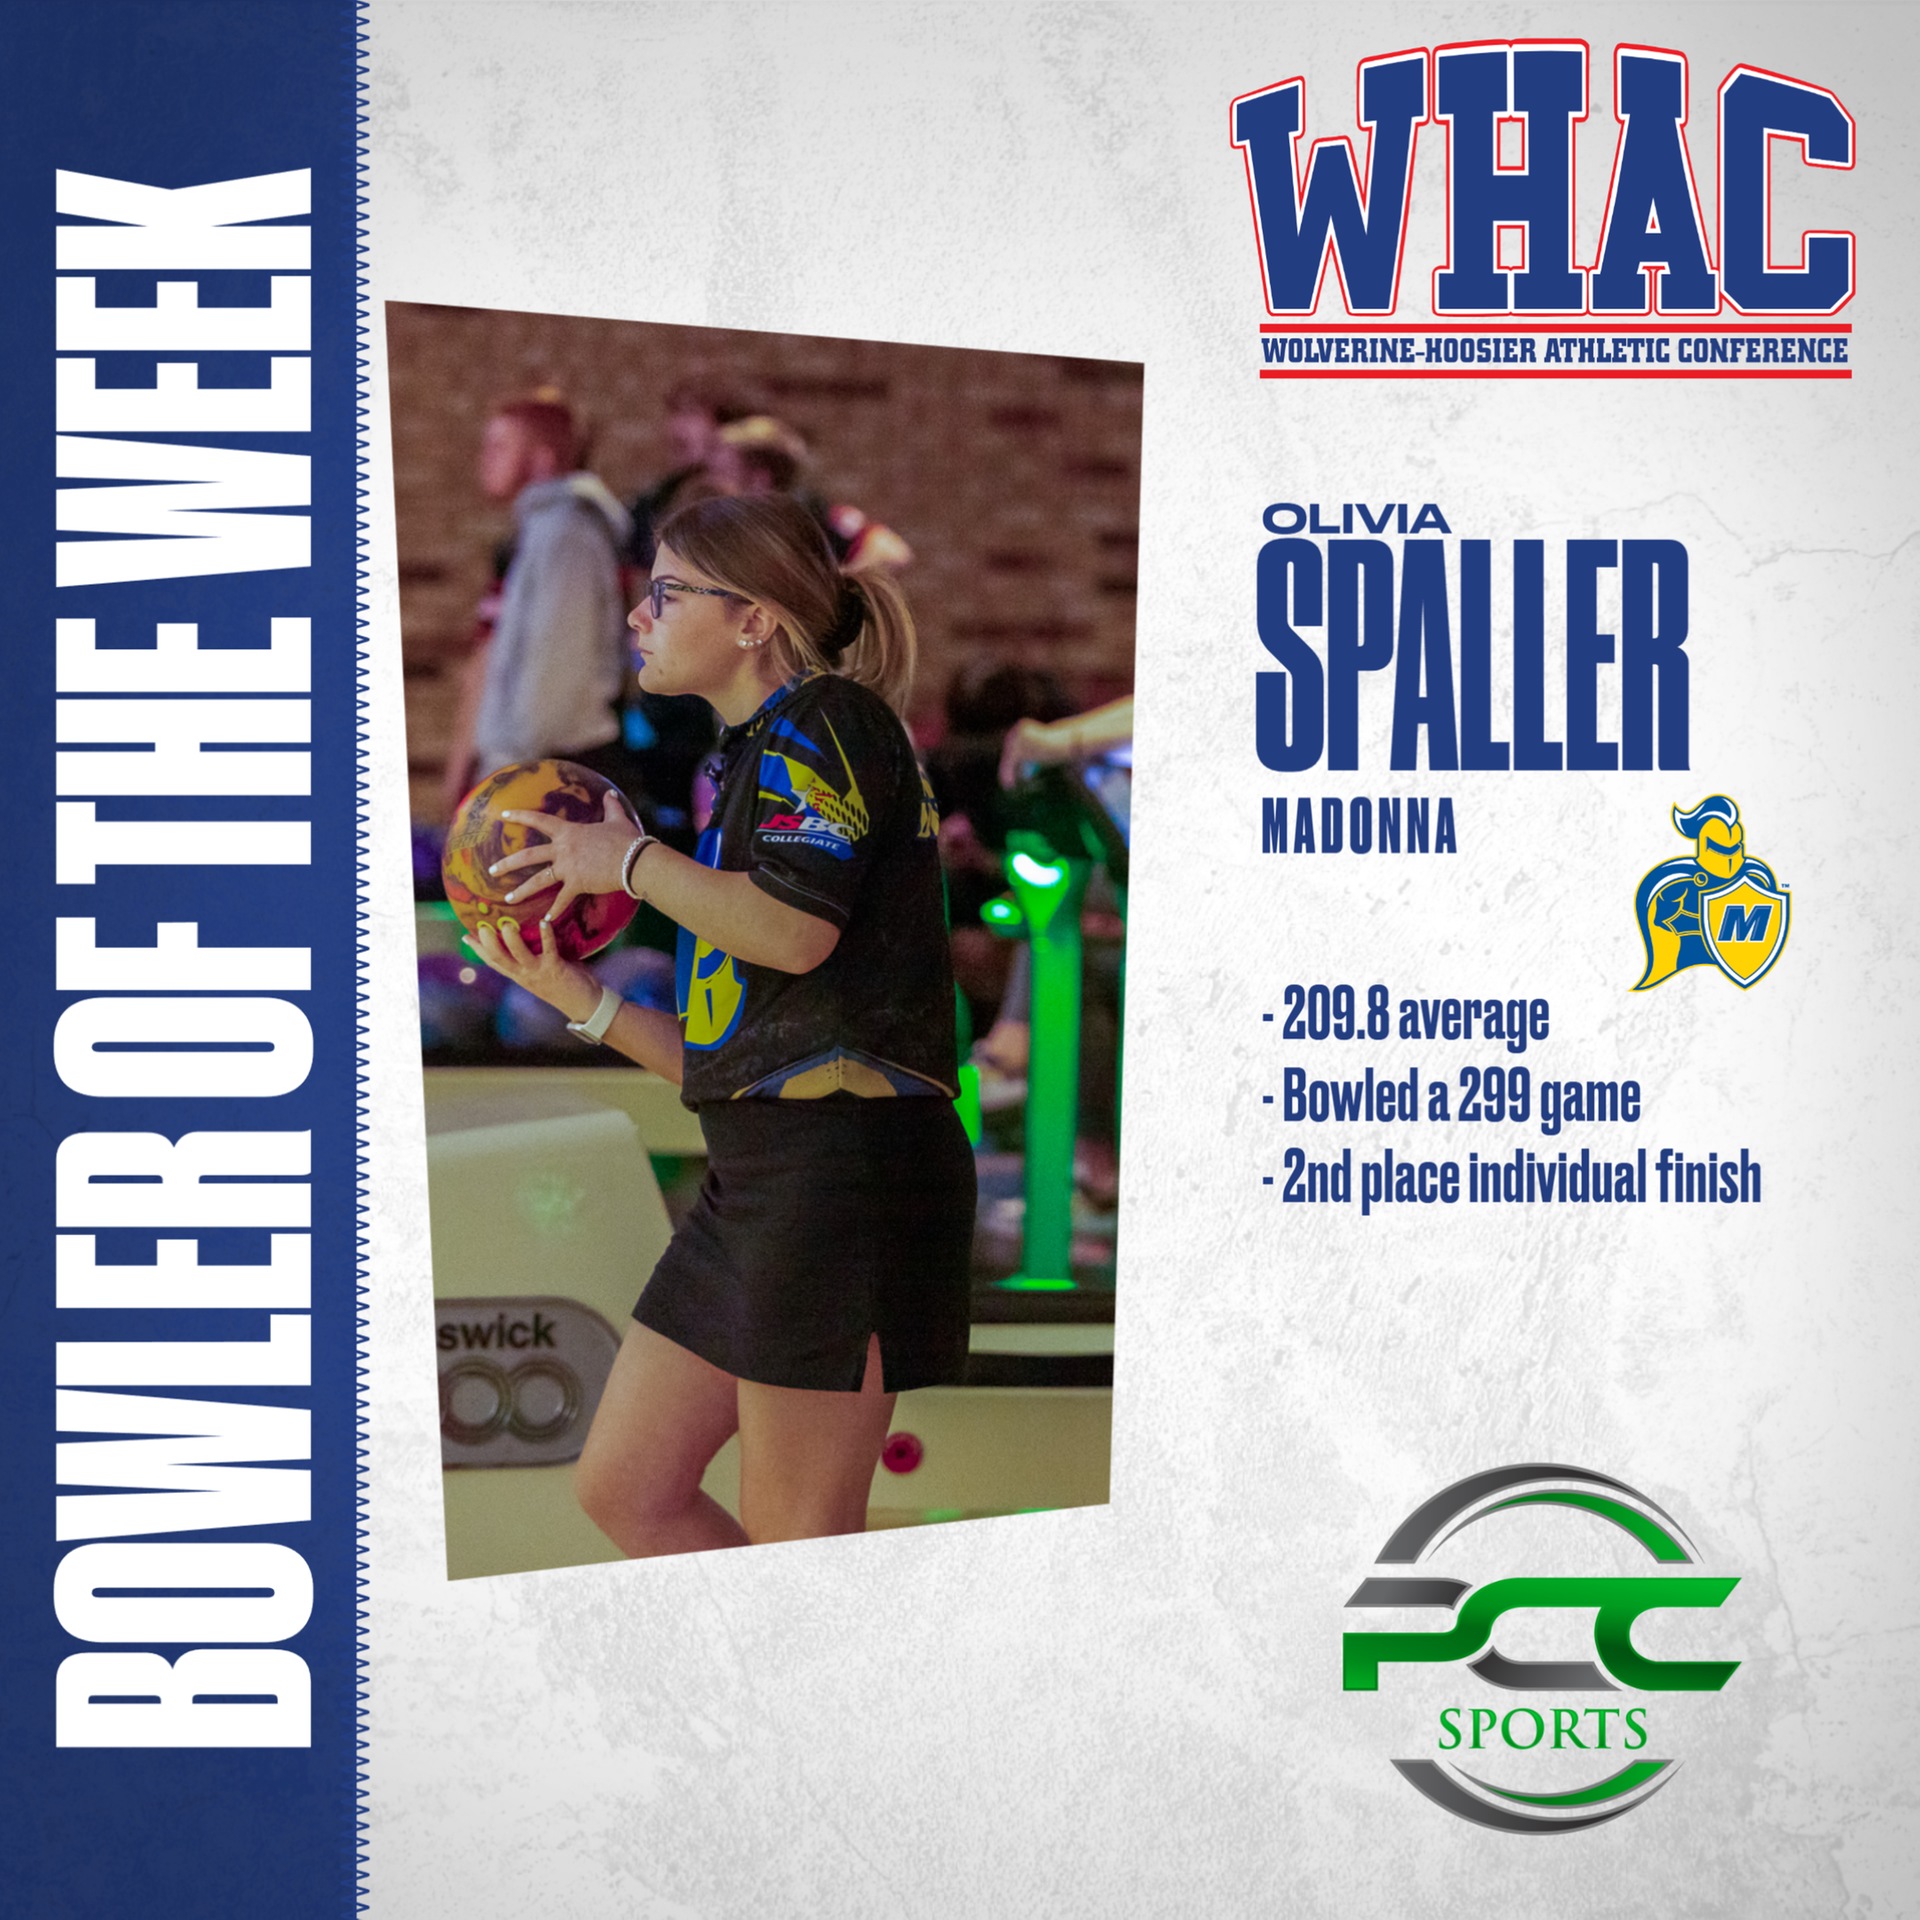 Madonna's Spaller named Women's Bowler of the Week